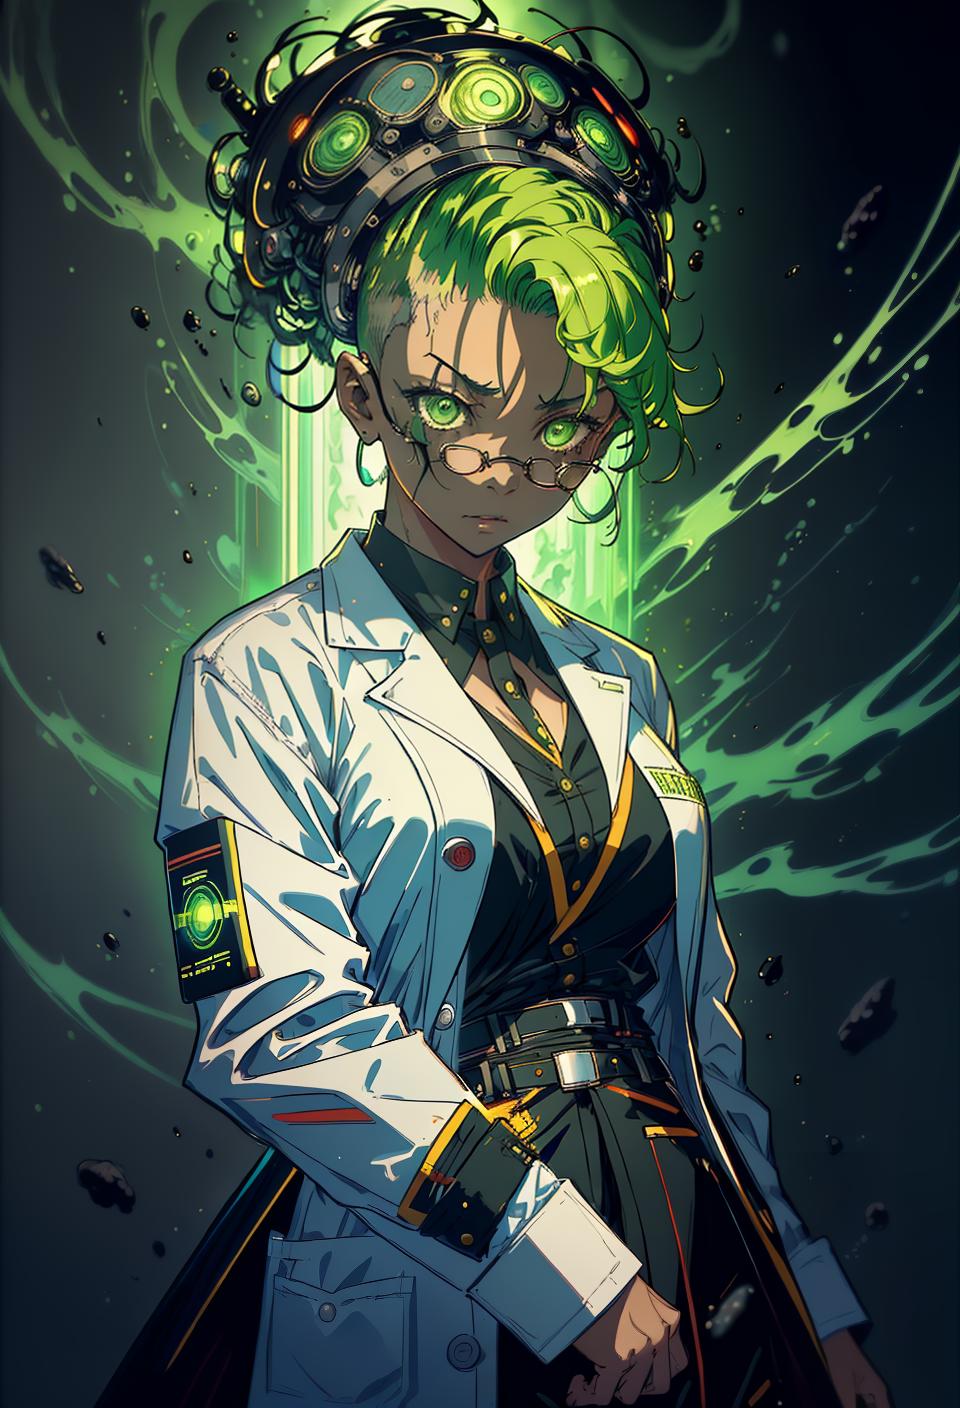  ((trending, highres, masterpiece, cinematic shot)), 1girl, young, female lab coat, otherworldly scene, very short wavy green hair, mohawk hairstyle, large amber eyes, psychopath, crazy personality, mischievous expression, very dark skin, epic, energetic